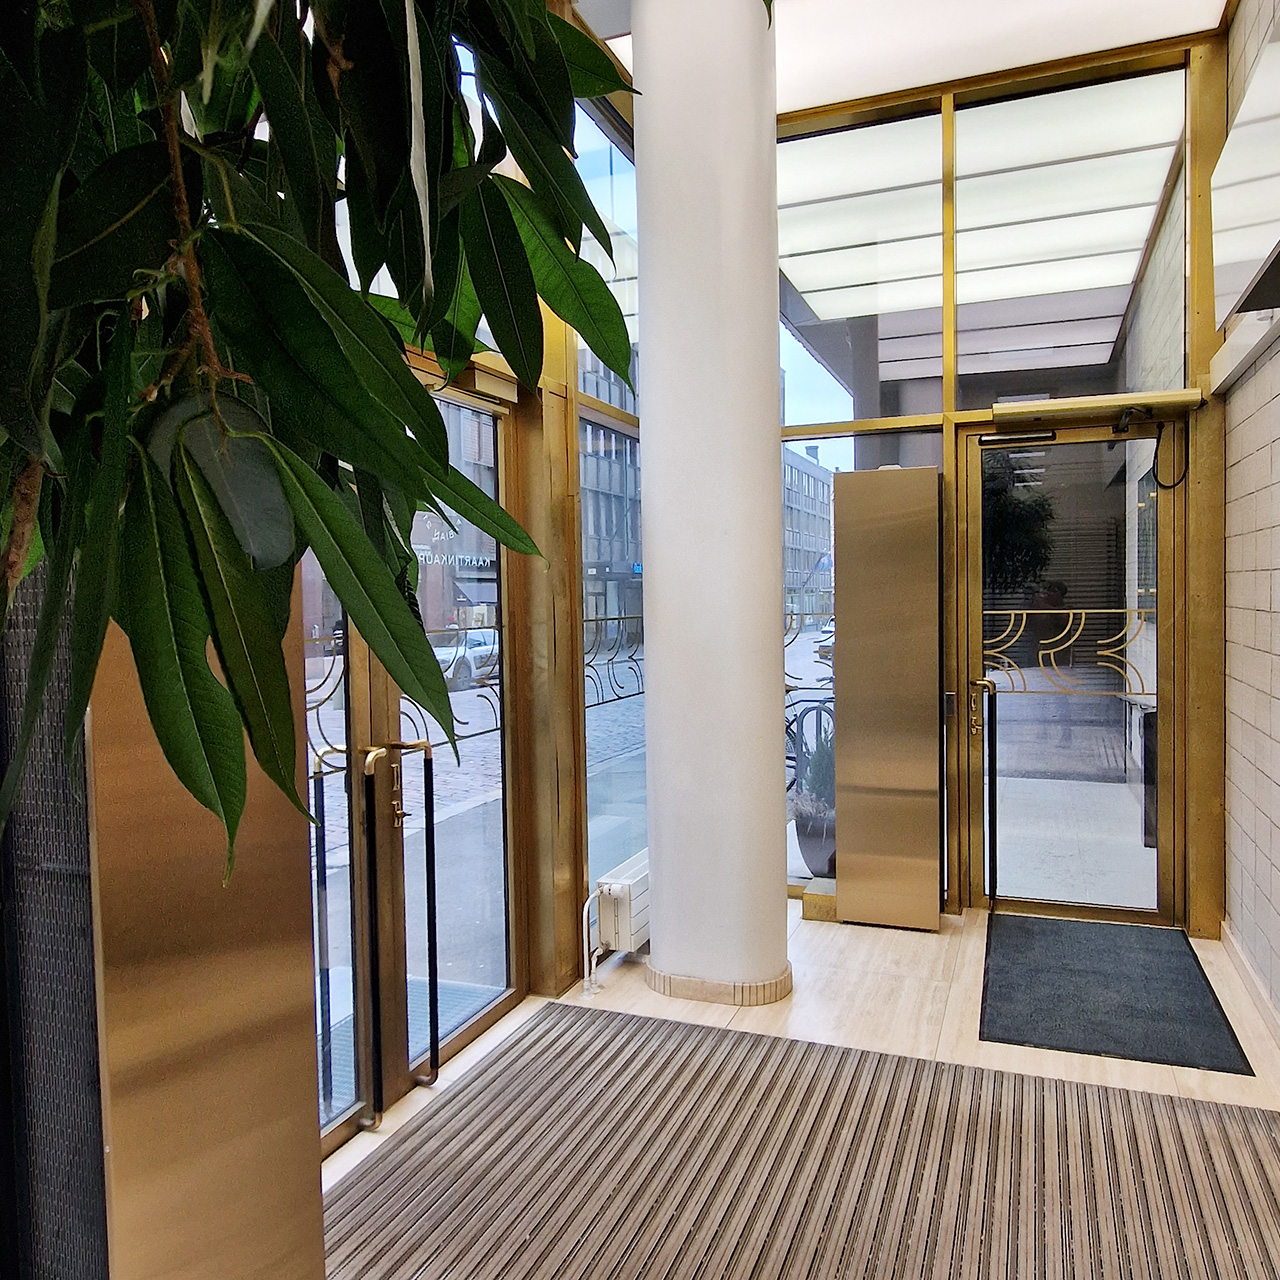 AICCI light panel cladding for FAB Helsinki's interior and exterior entrance.